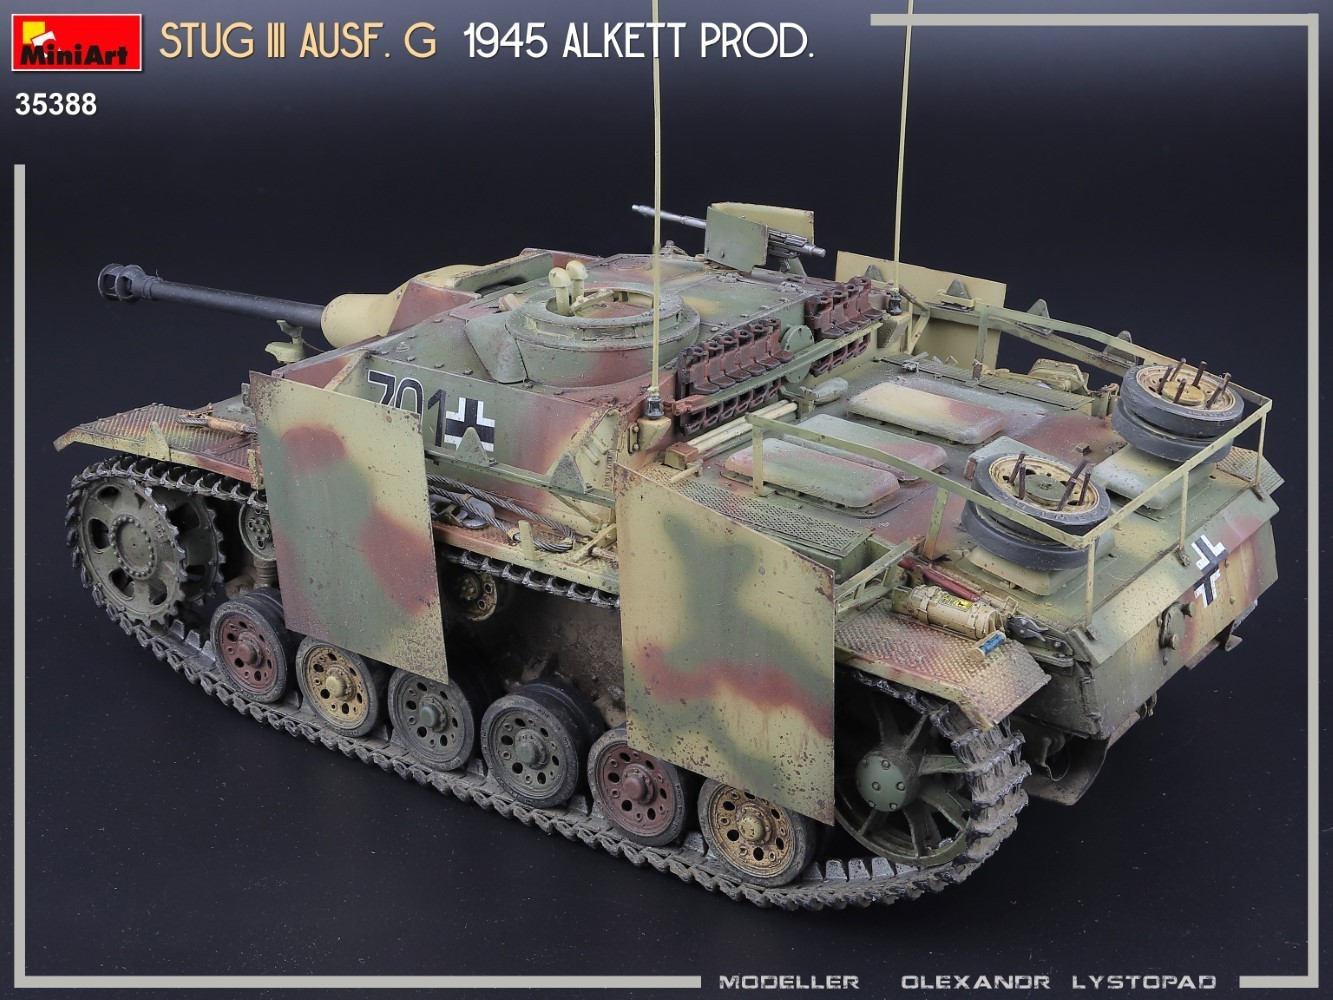 MiniArt to Release Highly Detailed 1/35 StuG III Ausf. G 1945 Alkett Prod. Model Kit Painting and Marking-16